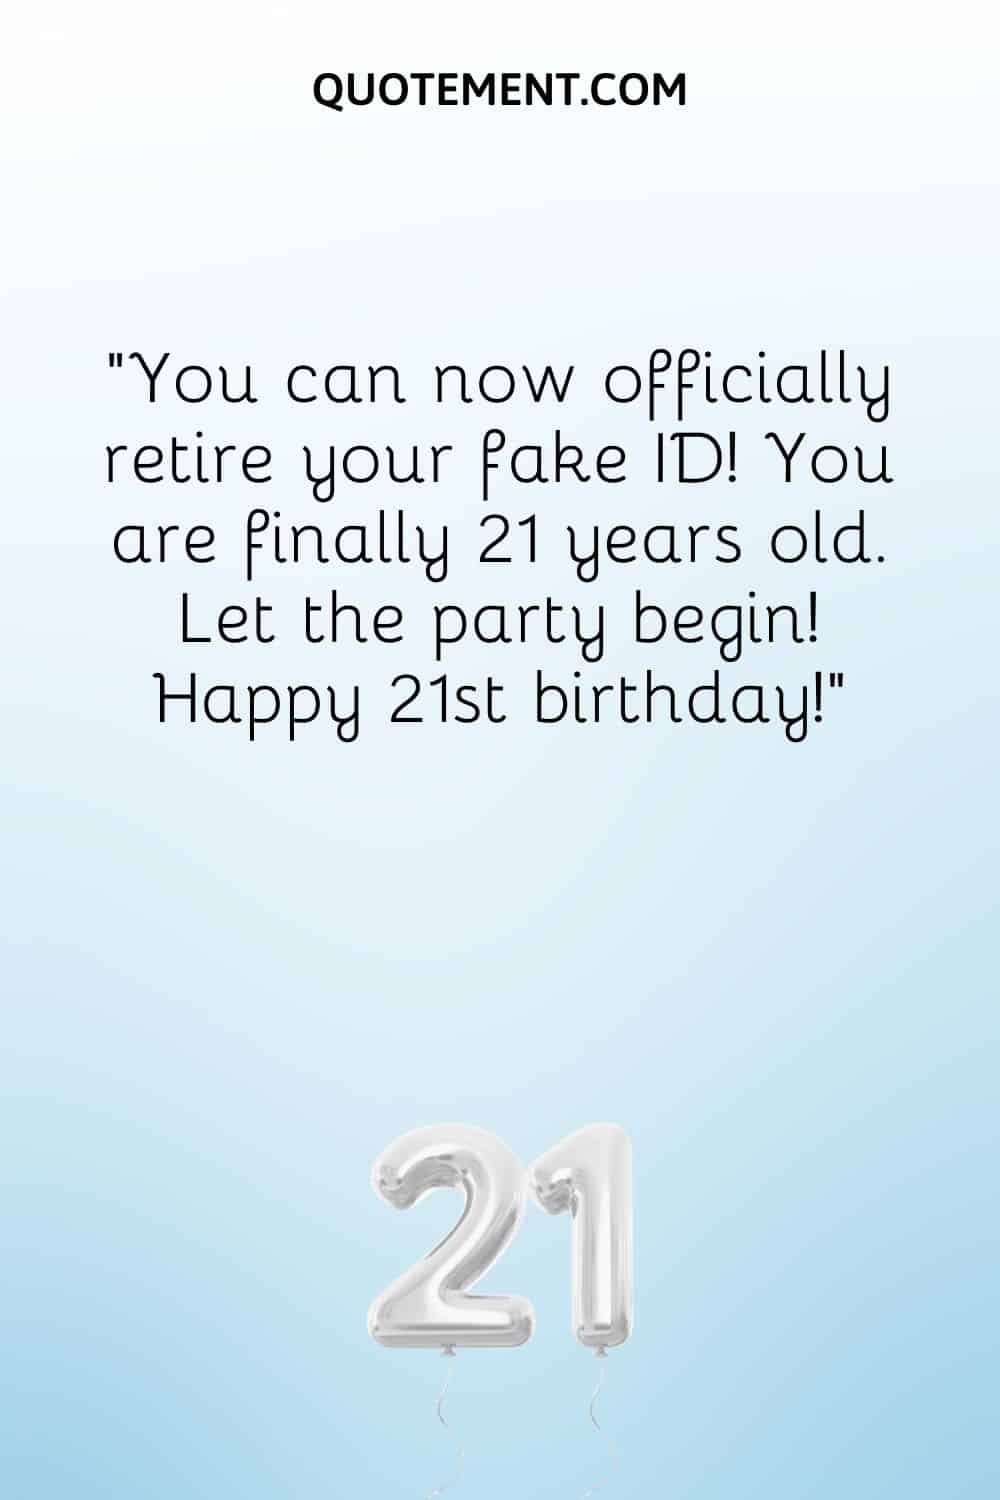 You can now officially retire your fake ID